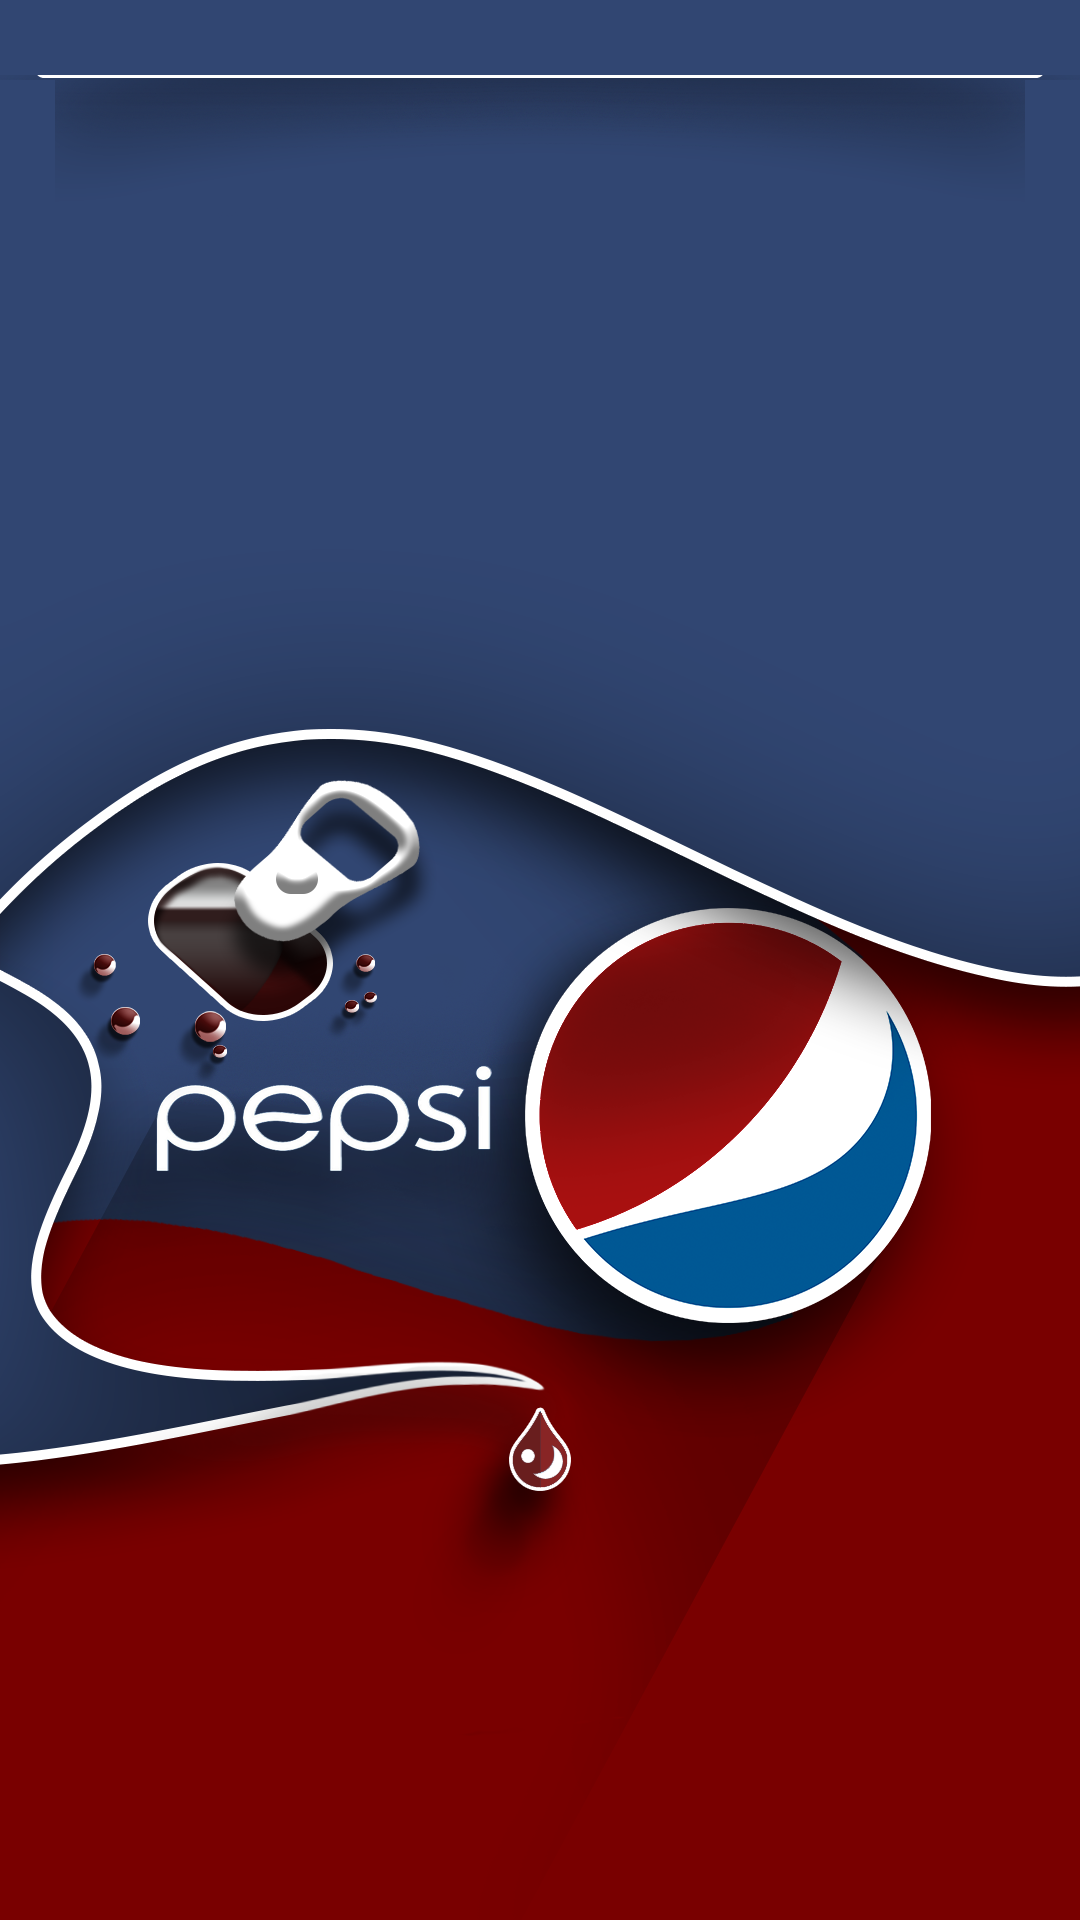 Pepsi Open Tab Wallpaper Abstract And Geometric